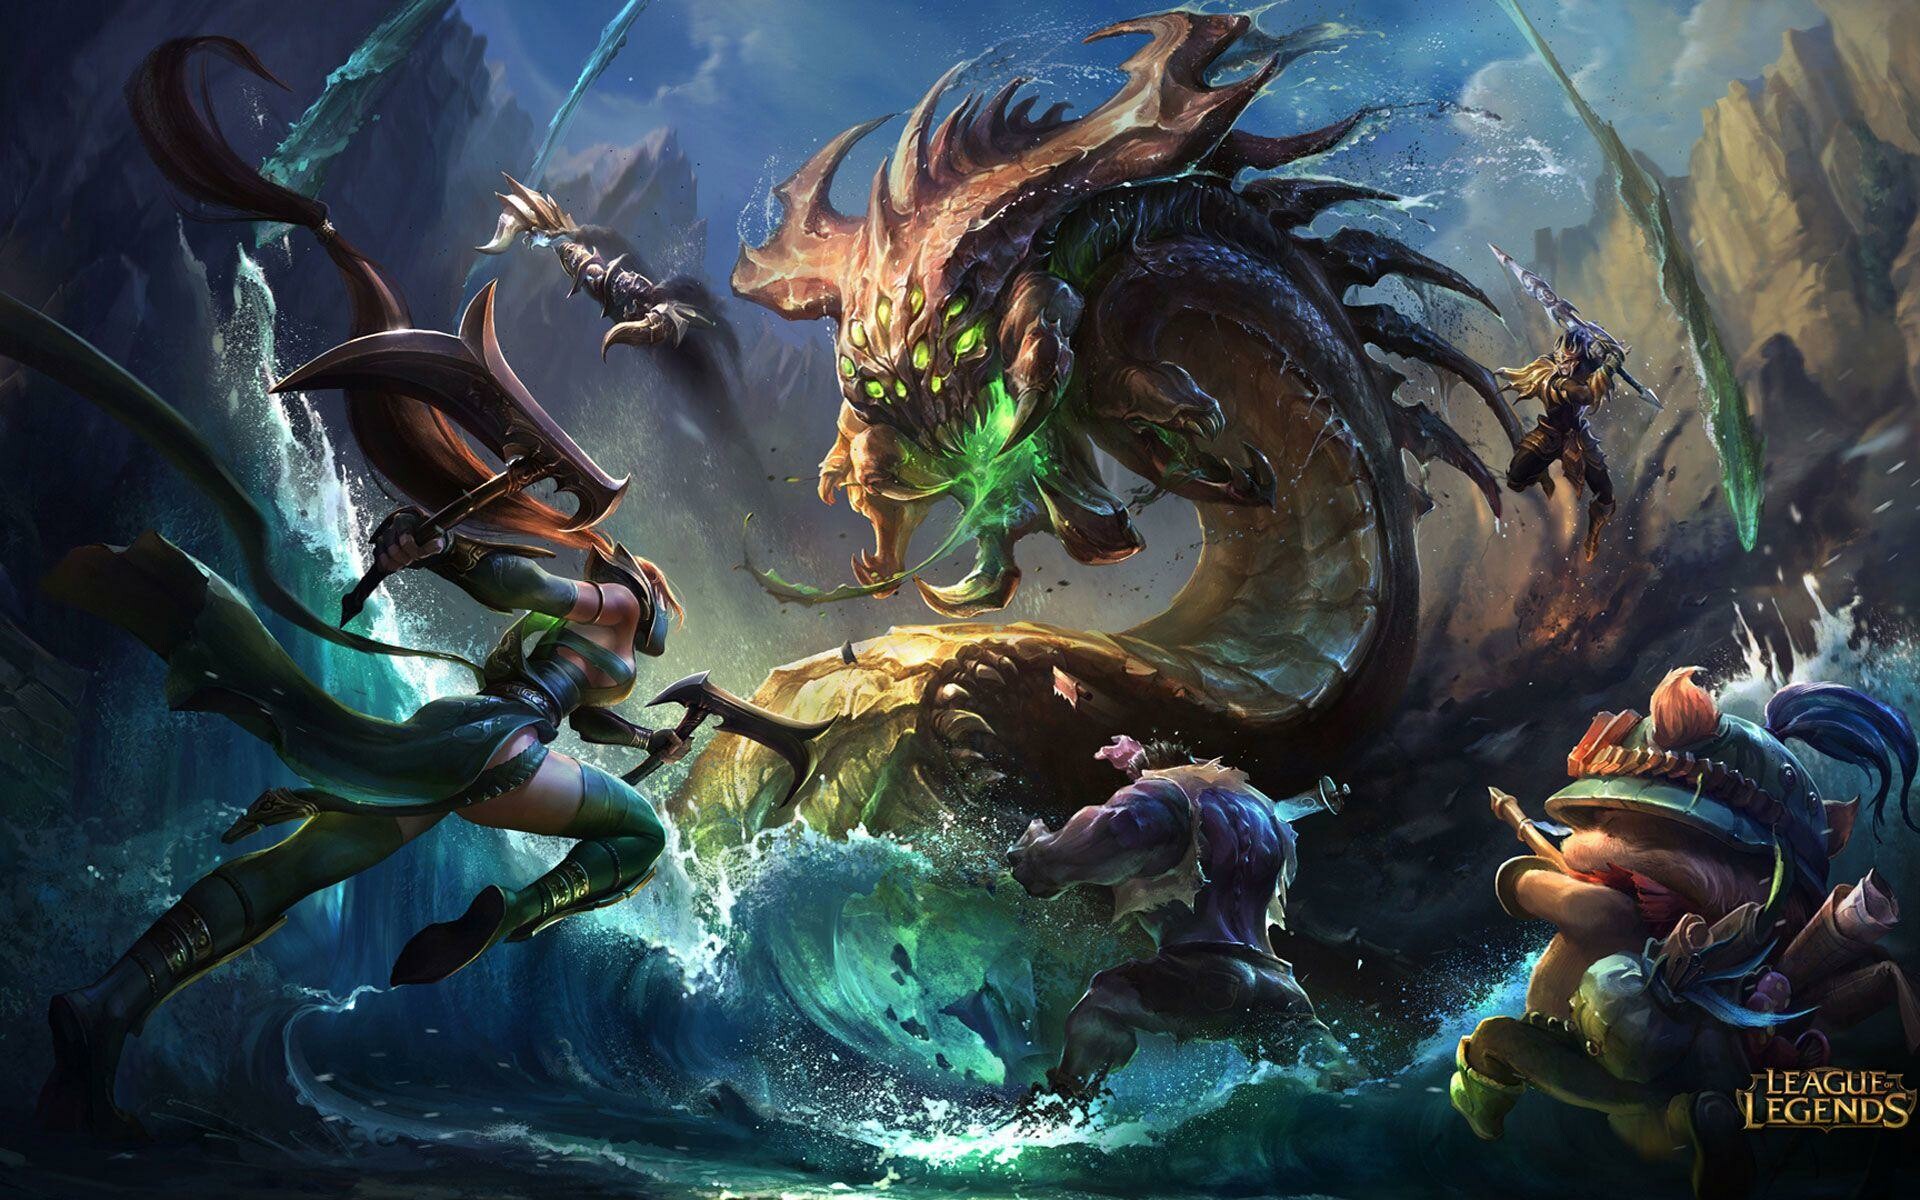 League of Legends: Each of the ten players controls a character, known as a "champion". 1920x1200 HD Wallpaper.